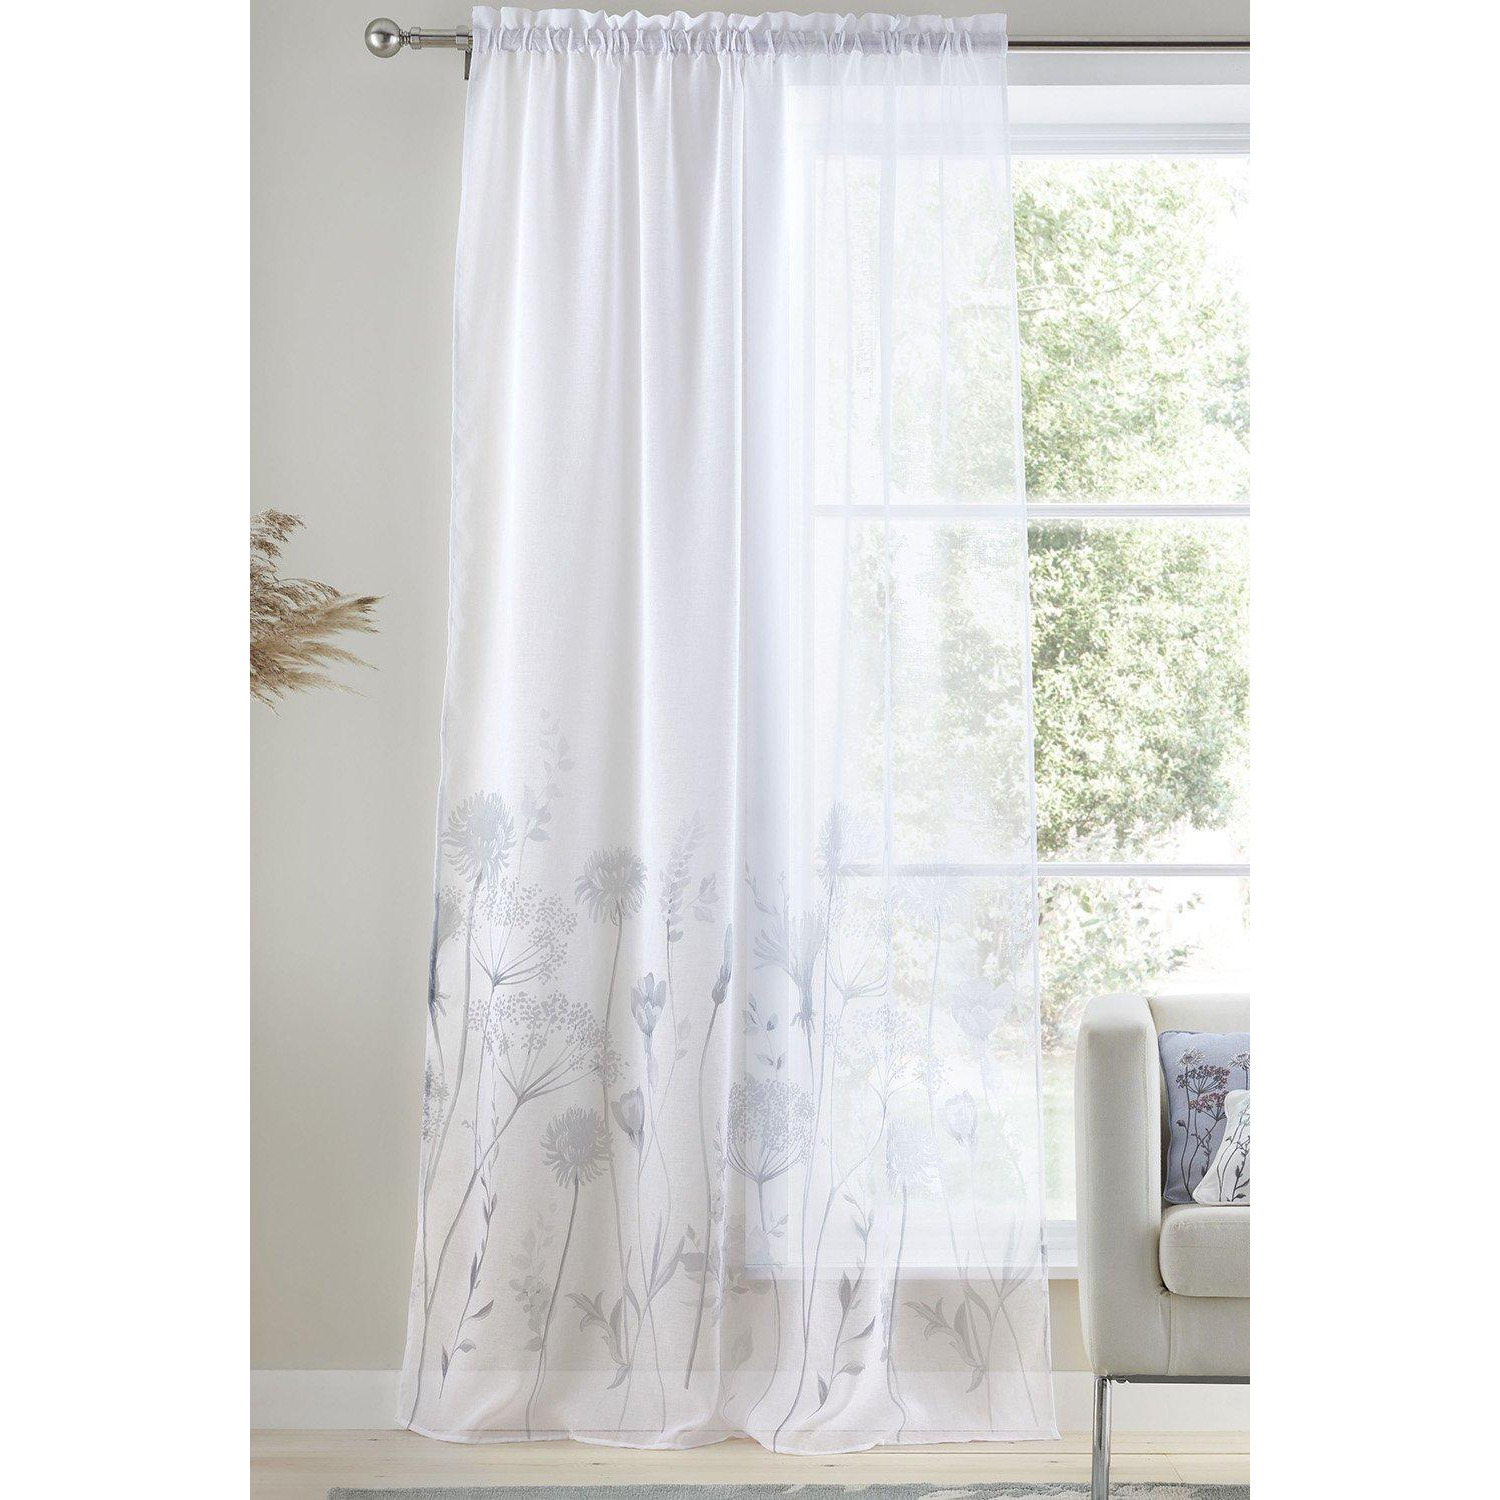 'Meadowsweet Floral' Voile Curtain Panel - image 1